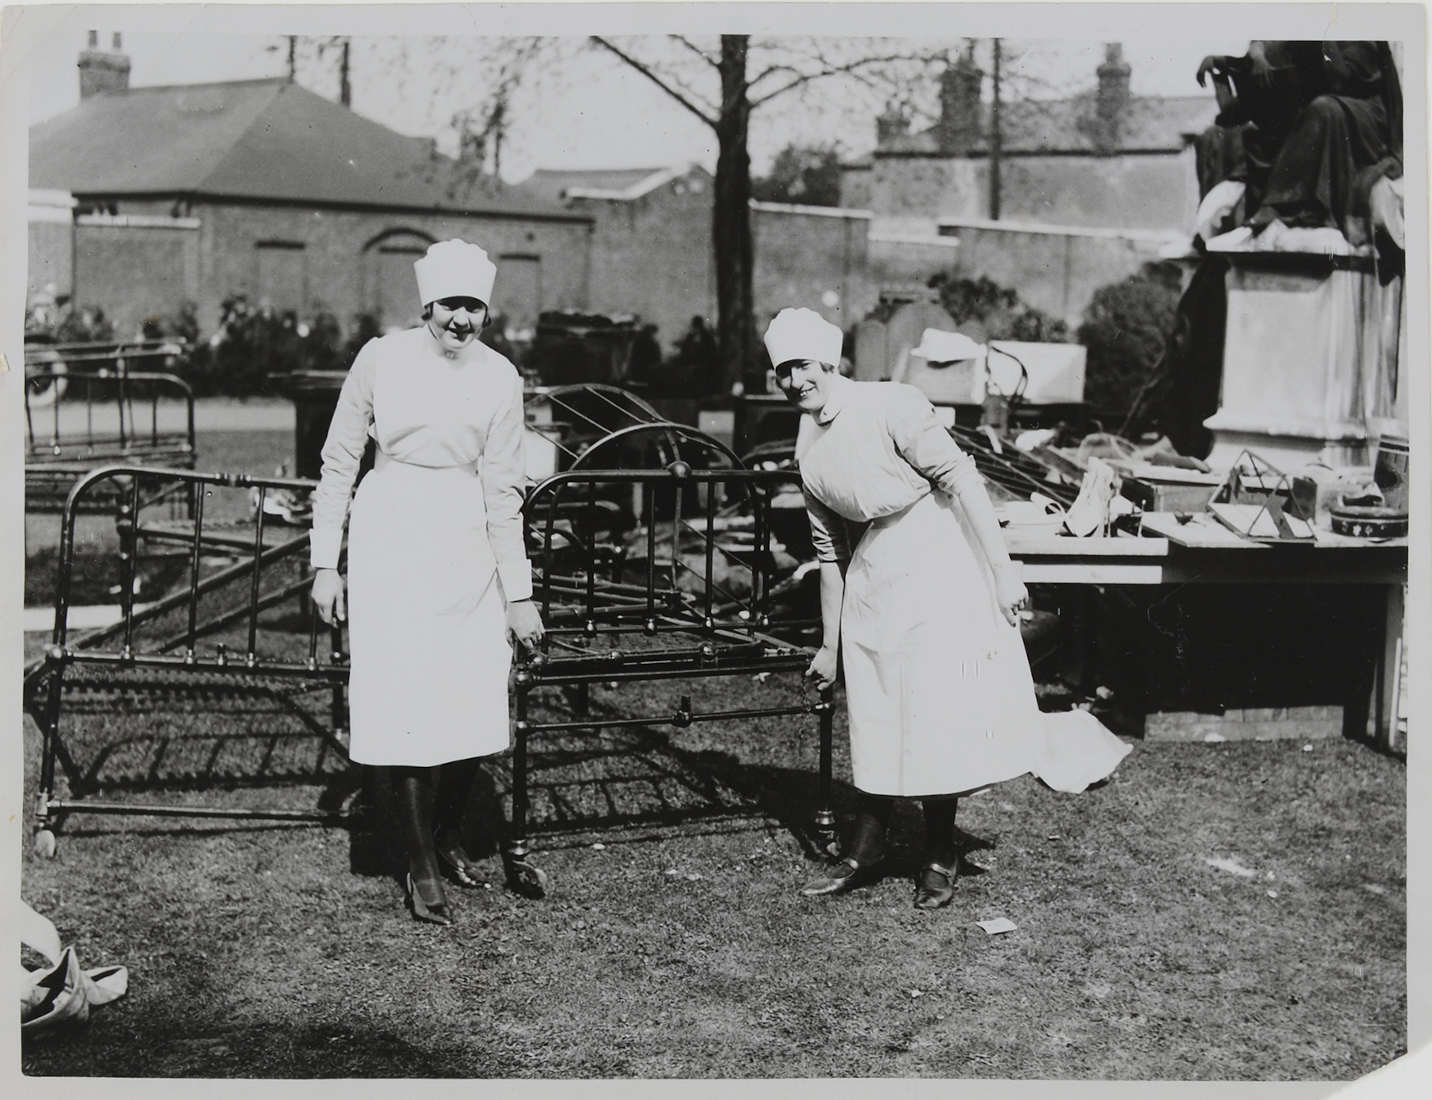 Nurses stand next to beds outside 1928 ref. D/H6/22/11/8